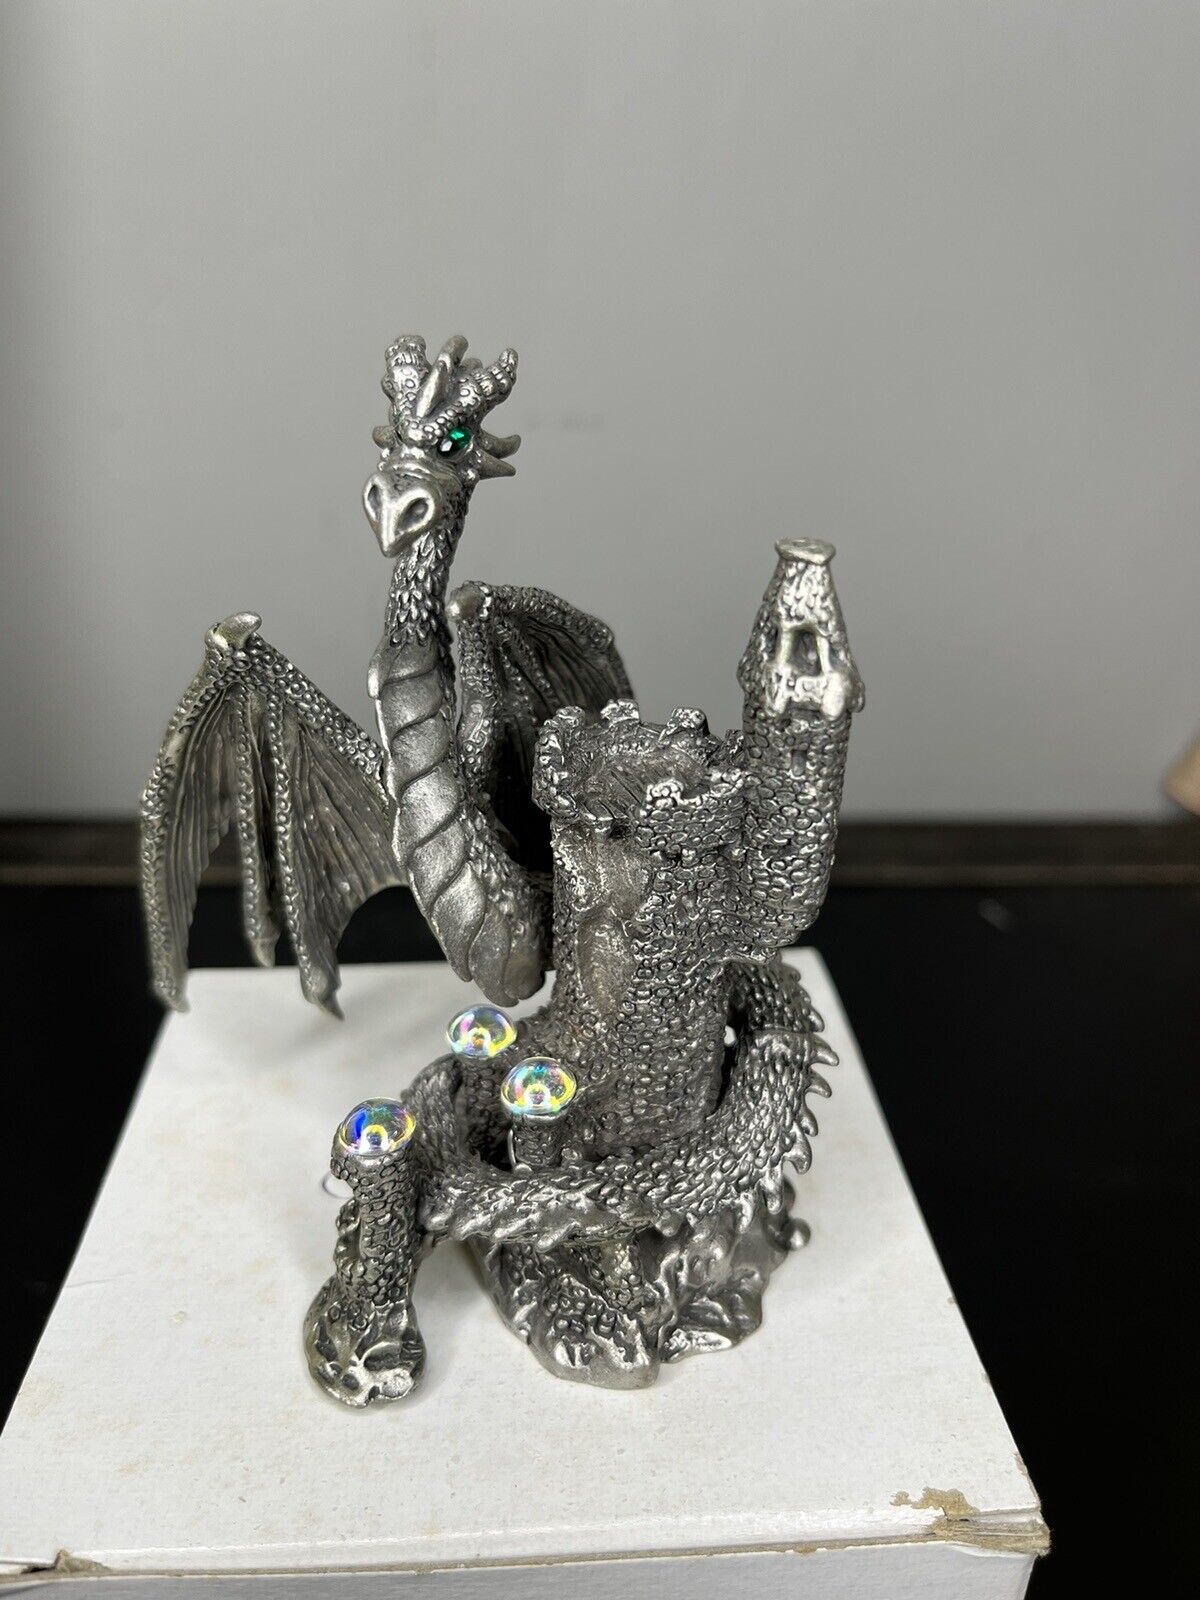 Rawcliffe Pewter Figurine Dragon/Wyvern on Castle - Pre-Owned in Box